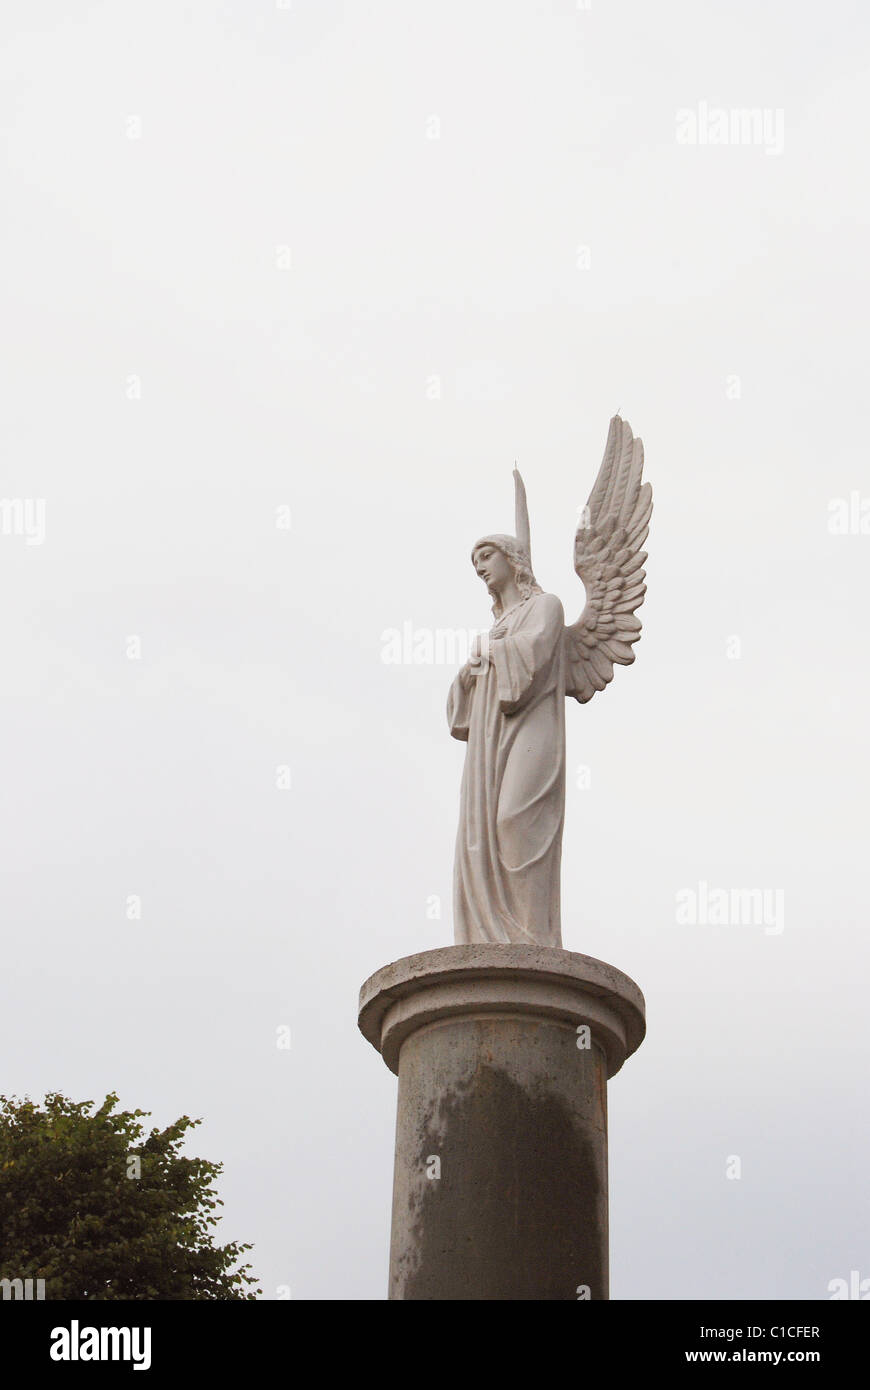 White angel with elevated wings on column Stock Photo